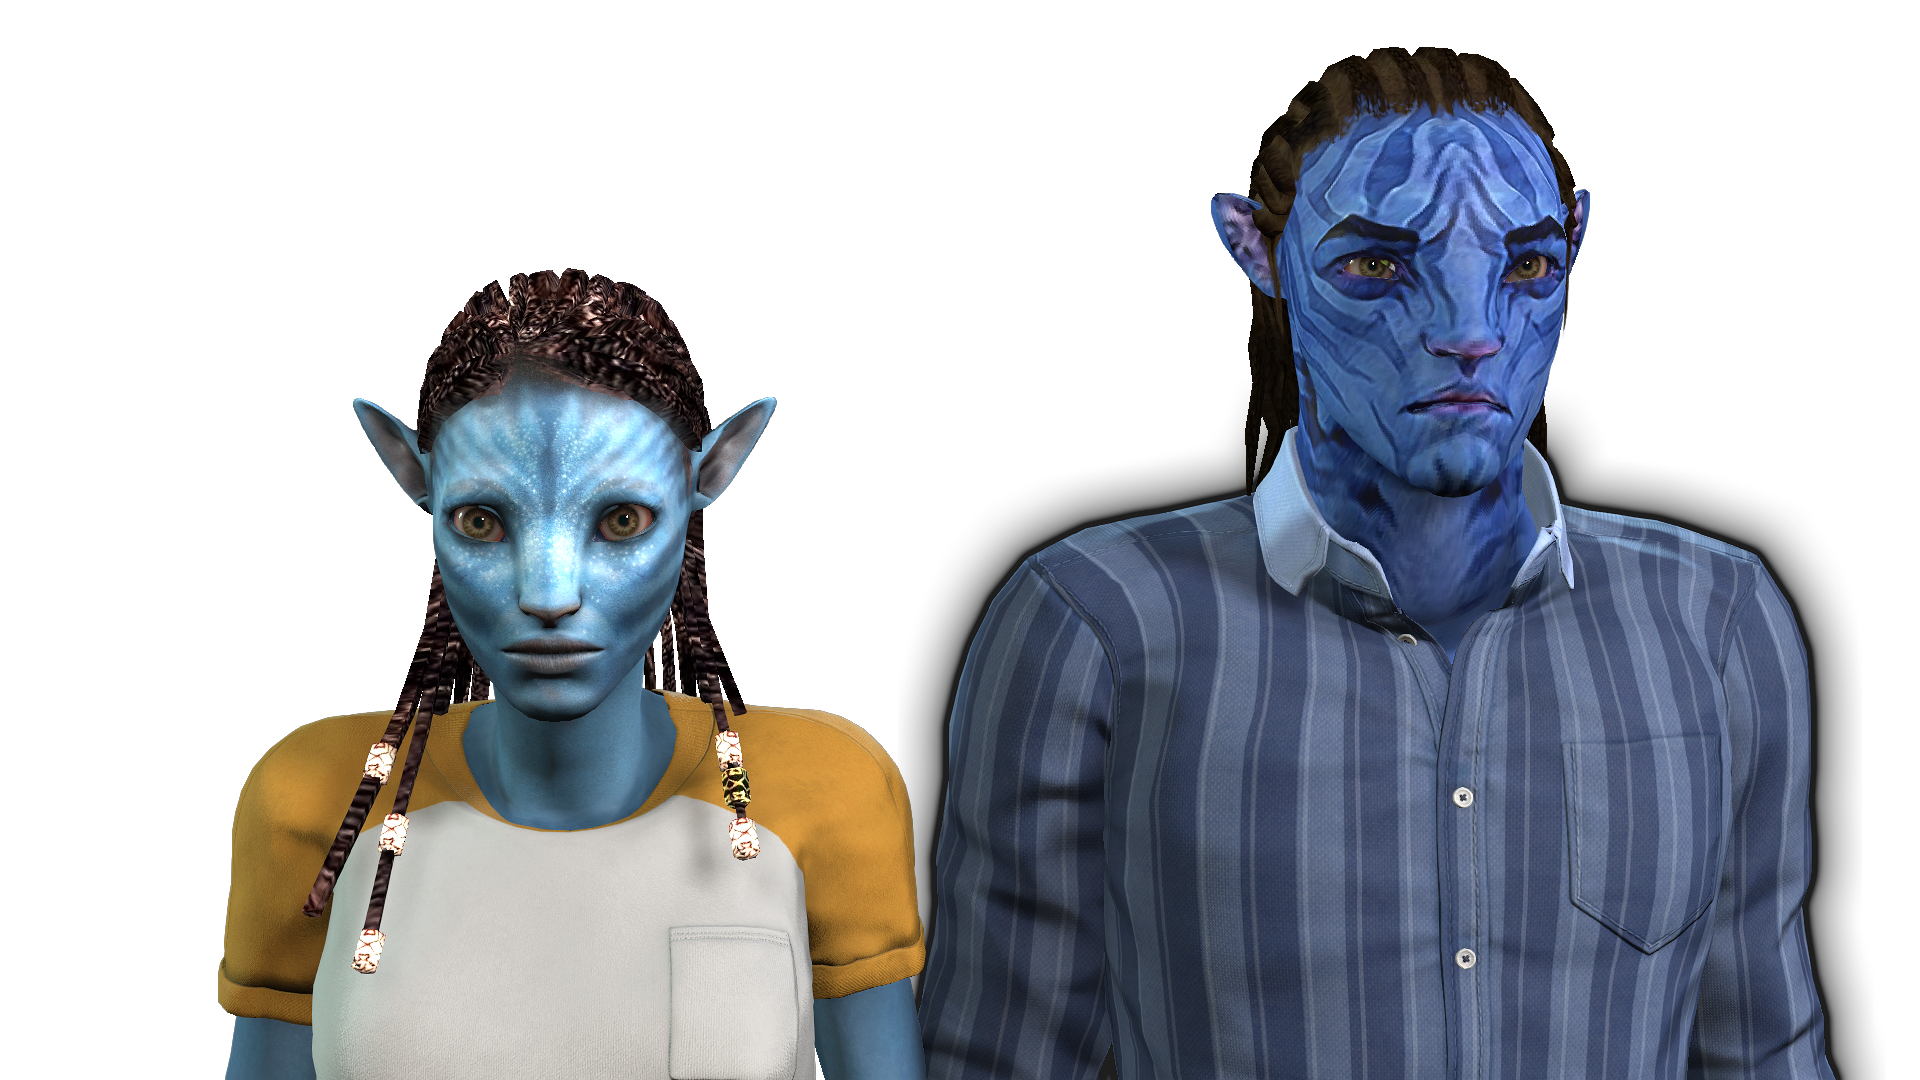 3D Human: Avatar - Clothed 3D Model: Creature: Alien Created by: Freedom Arts 3D Filetype: ccAvatar Filetype: iAvatar Price: FREE DOWNLOAD* Product: 3D Model Software: Character Creator 4 (CC4) Style: Cartoon